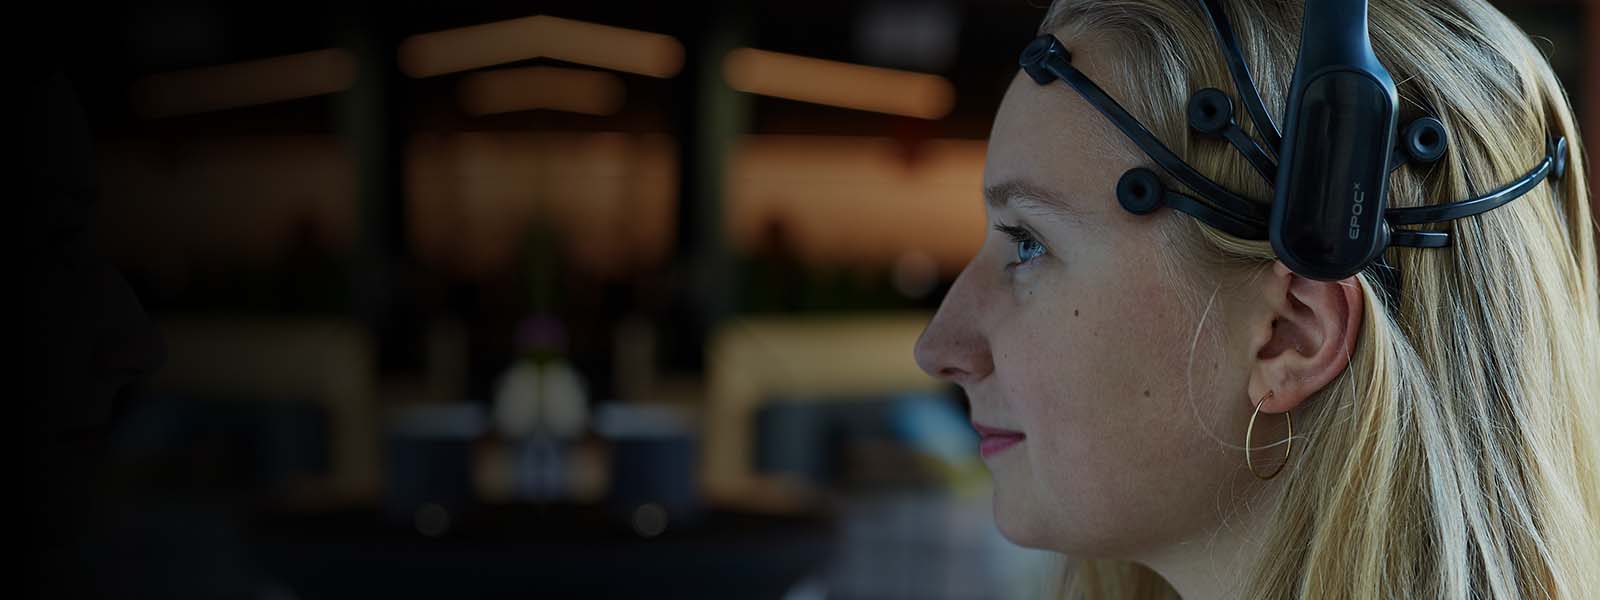 A lady using EEG headset for brain data measuring